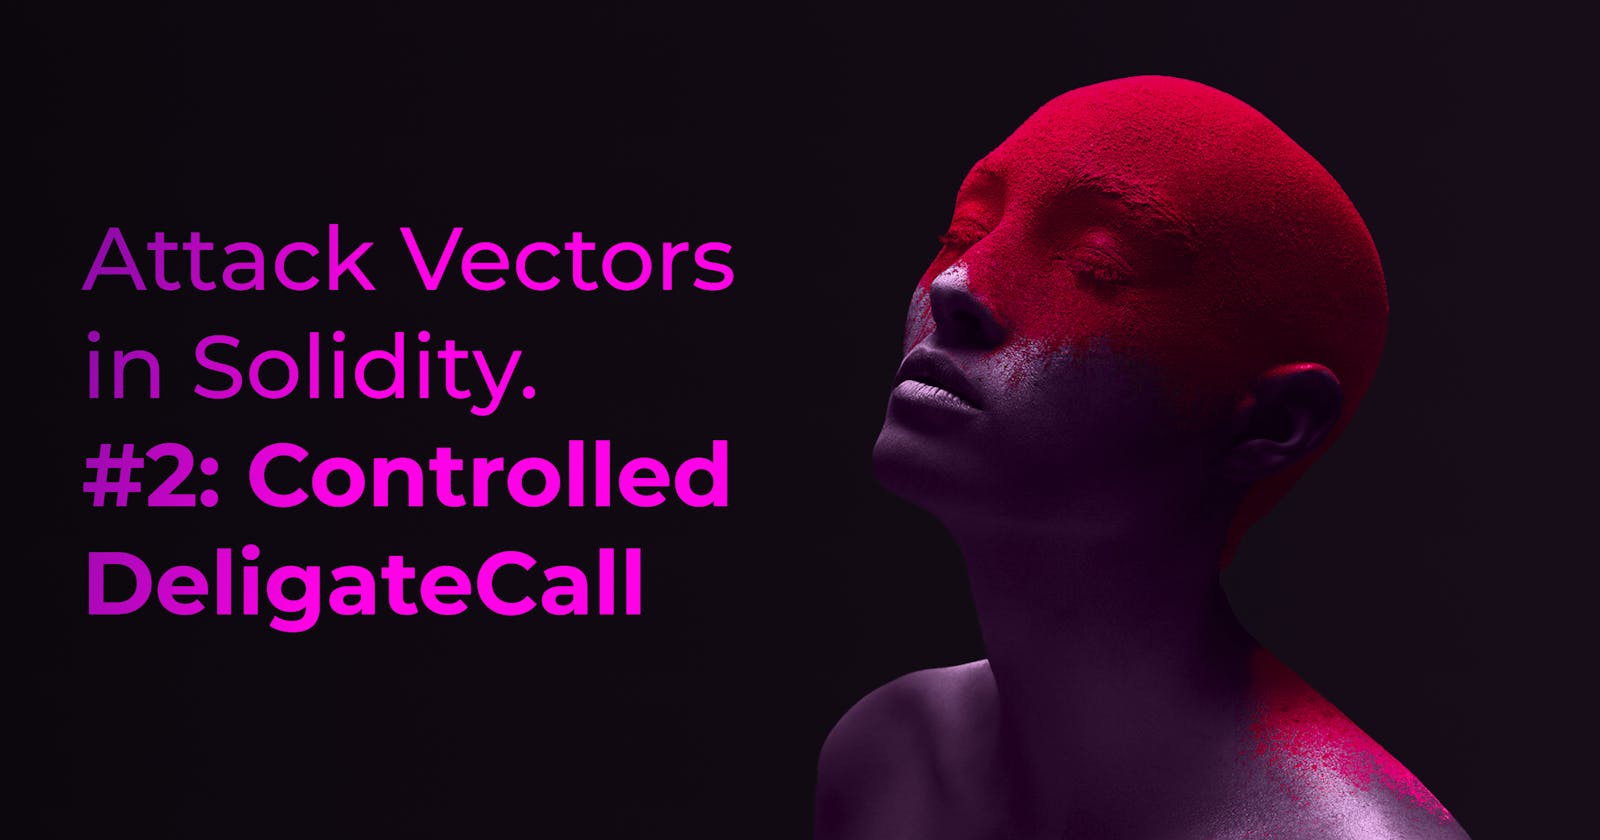 Attack Vectors in Solidity #2: Controlled DeligateCall